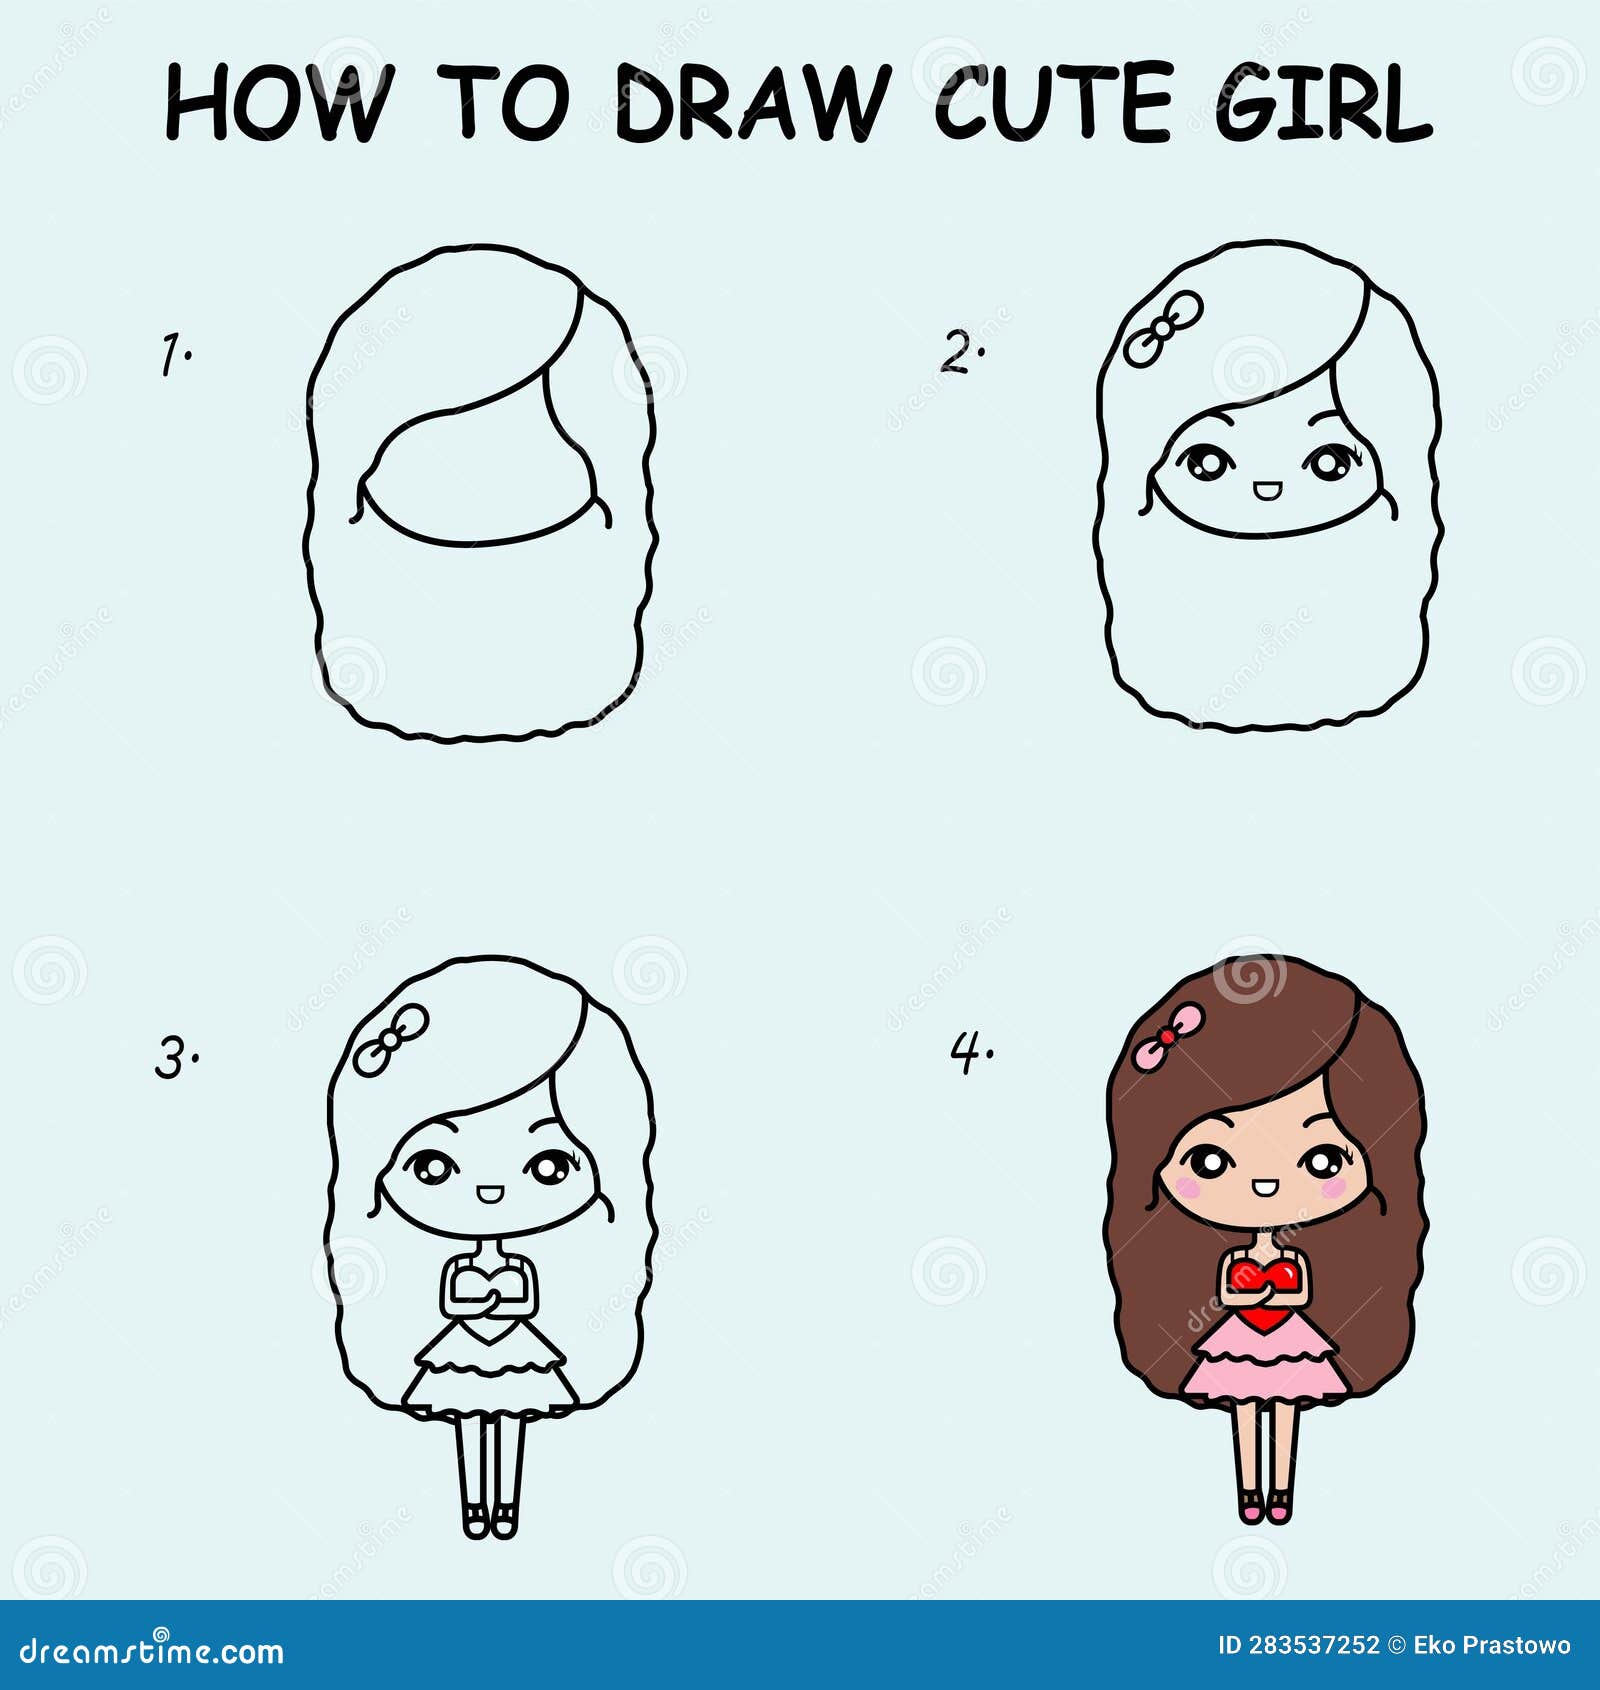 How to Draw a Cute Girl in Christmas Ugly Sweater - YouTube